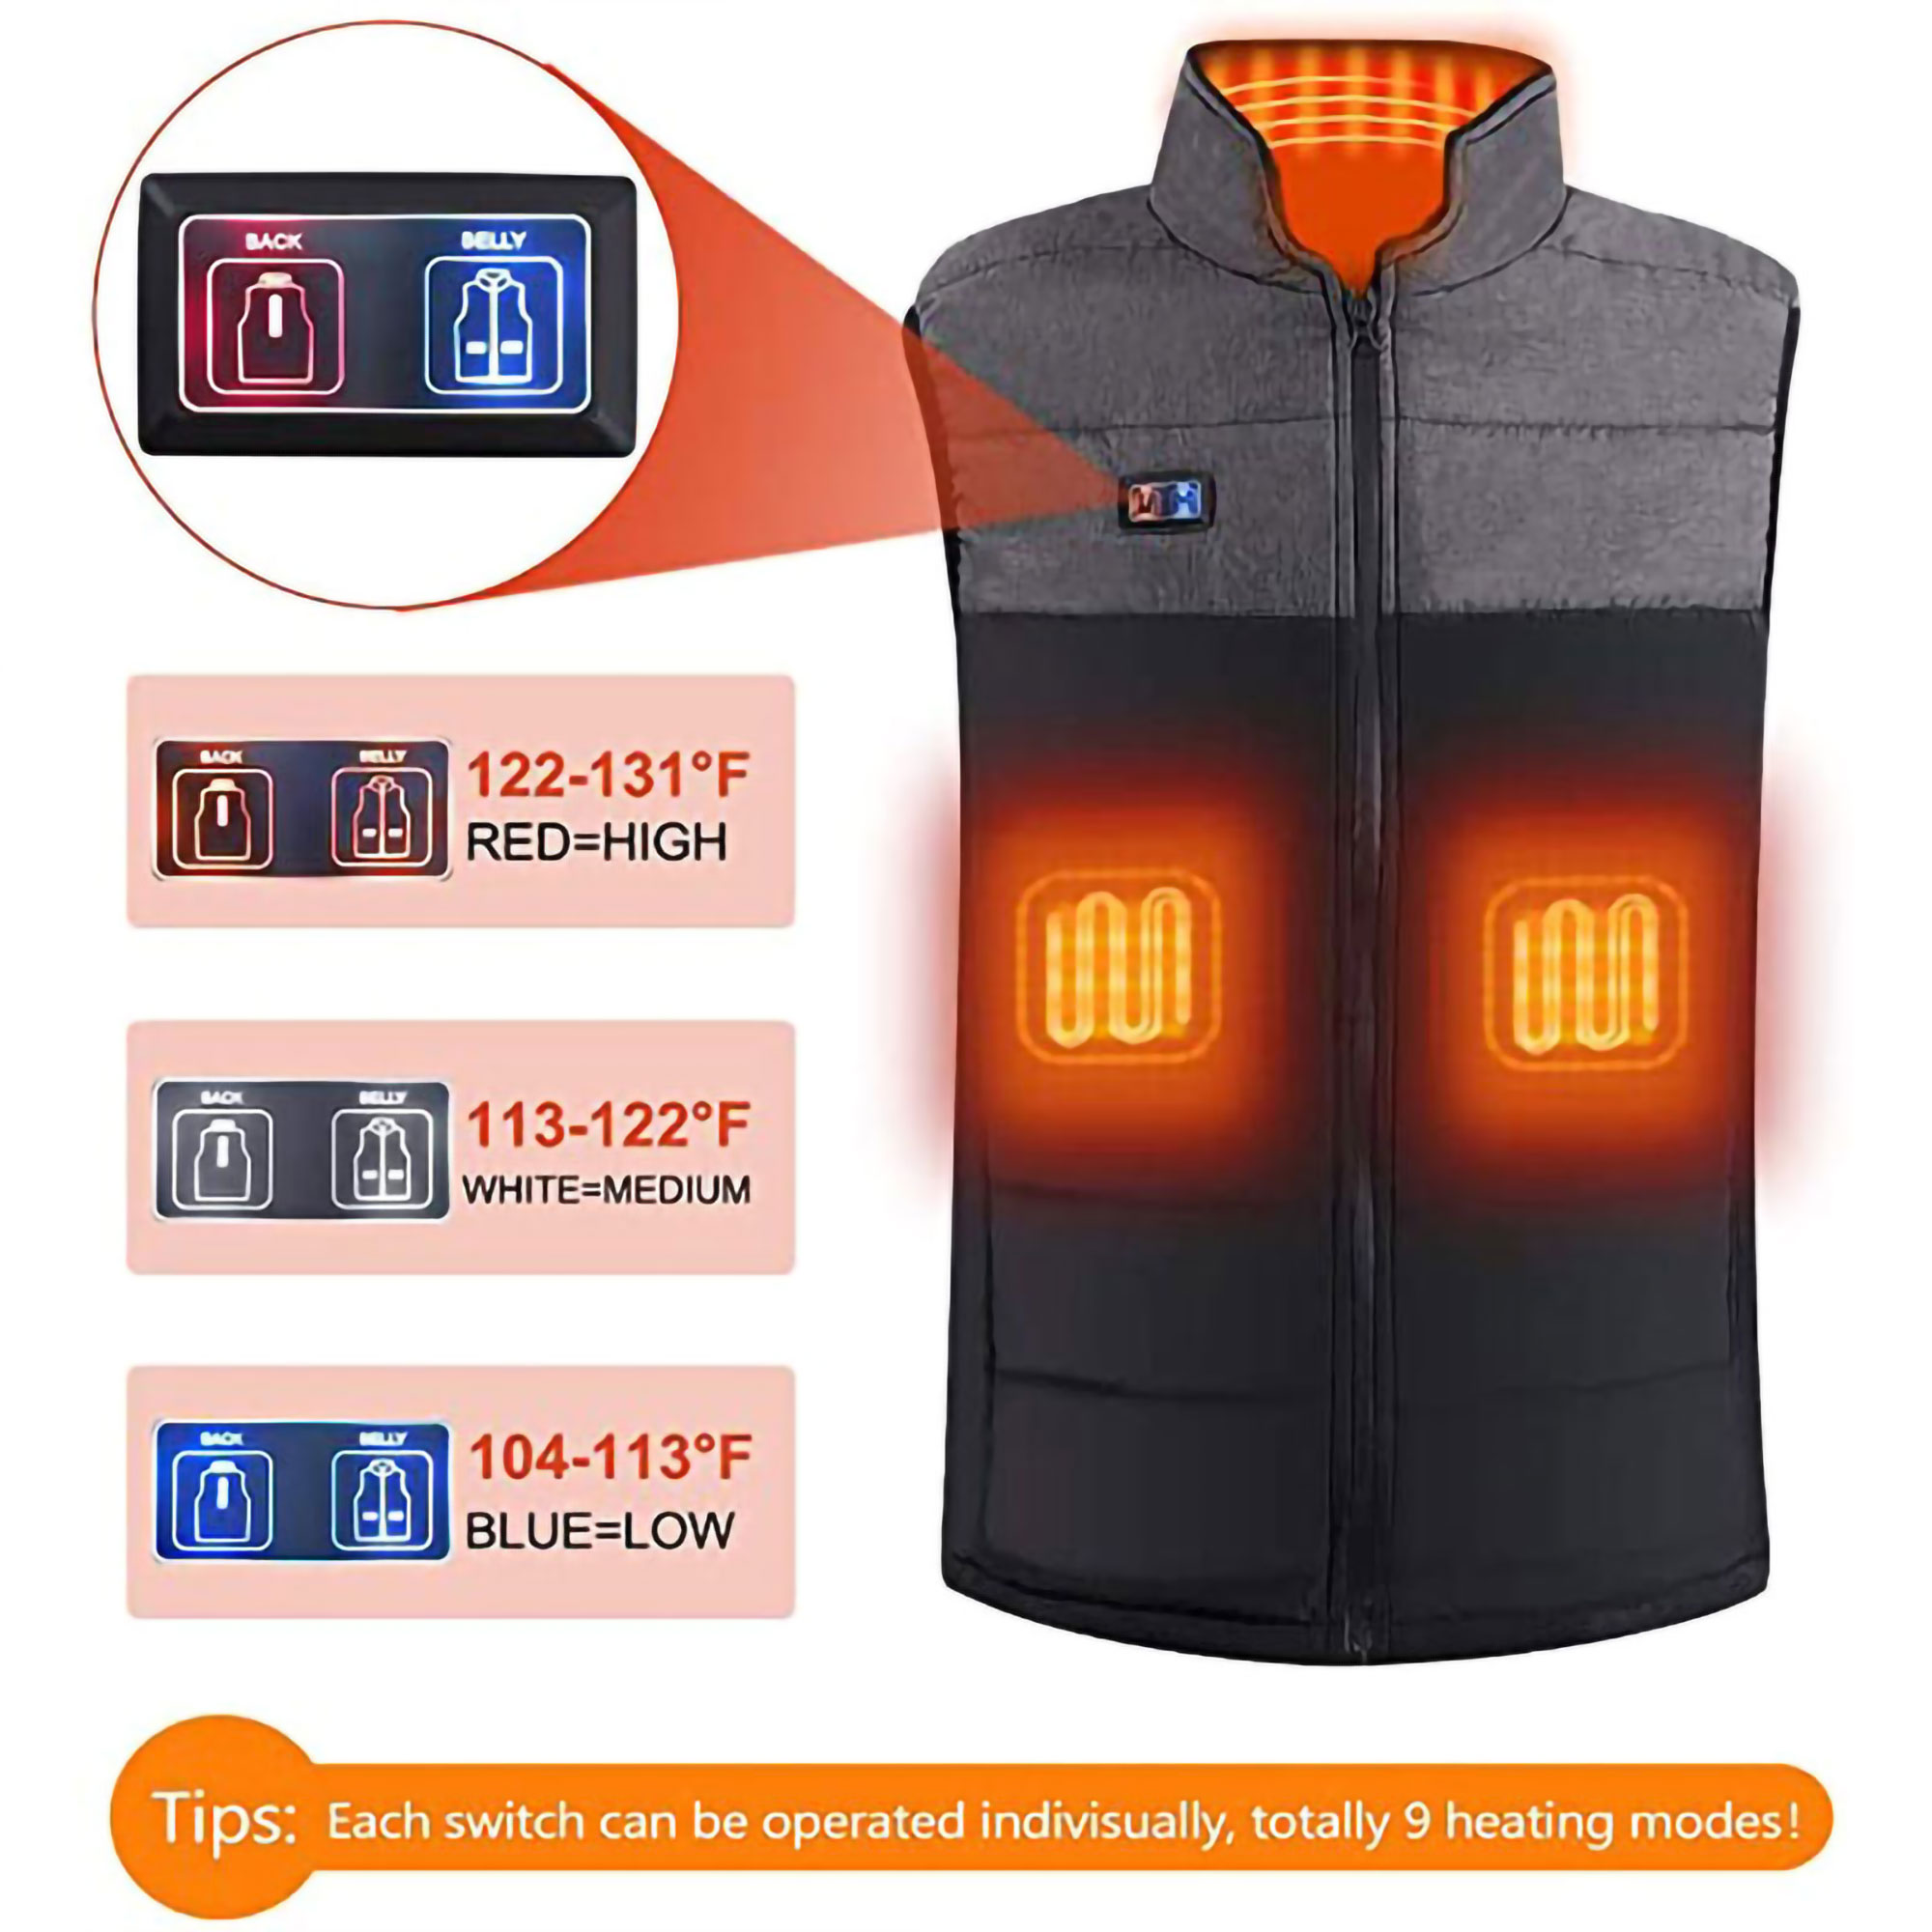 Sexy Dance Electric Thermal Heated Vest for Men Women Sleeveless Zipper Heating Jacket Lightweight Warmth Outwear With Battery Pack - image 4 of 11